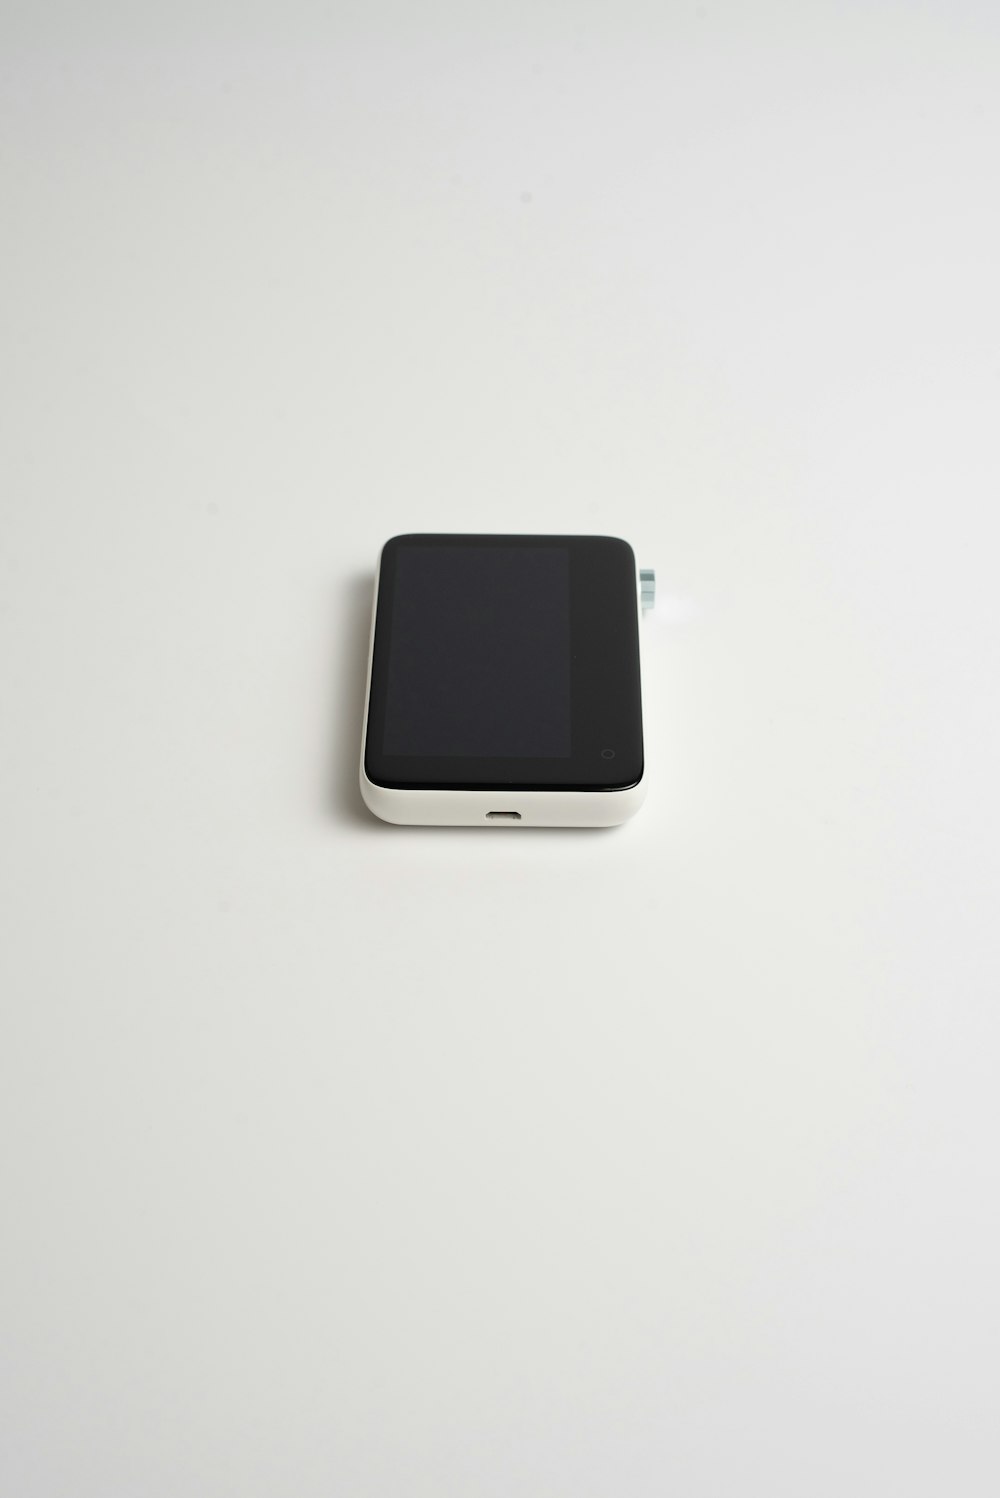 a black and white cell phone sitting on a white surface